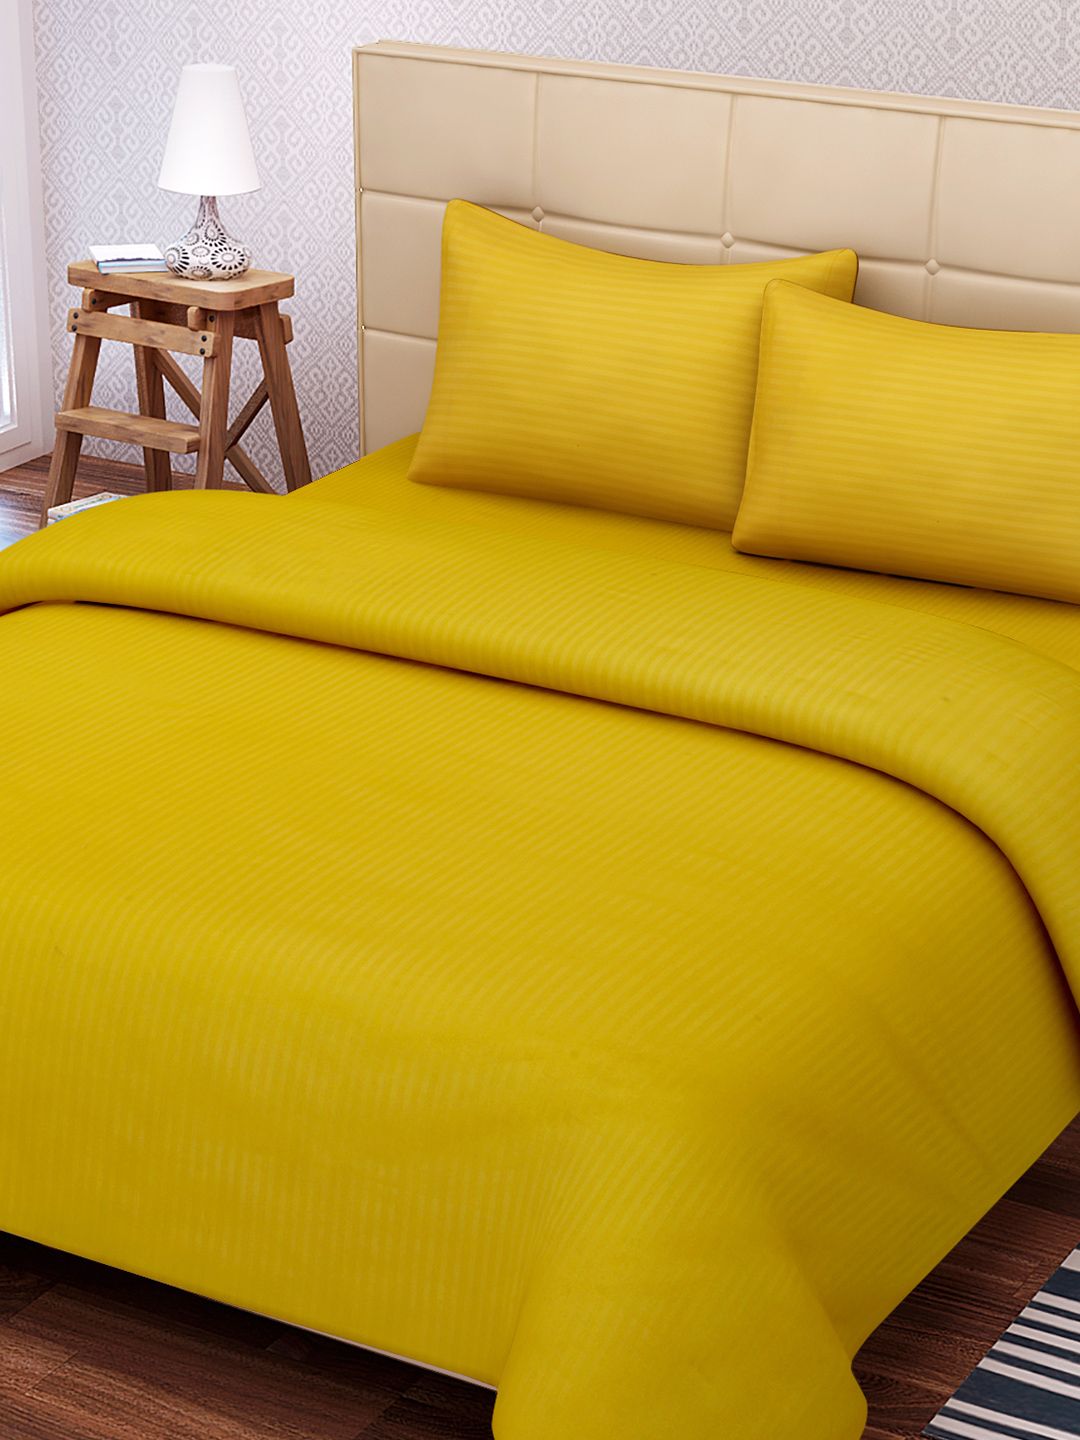 SEJ by Nisha Gupta Mustard Yellow 220 TC Fine Cotton Queen Bedsheet with 2 Pillow Covers Price in India